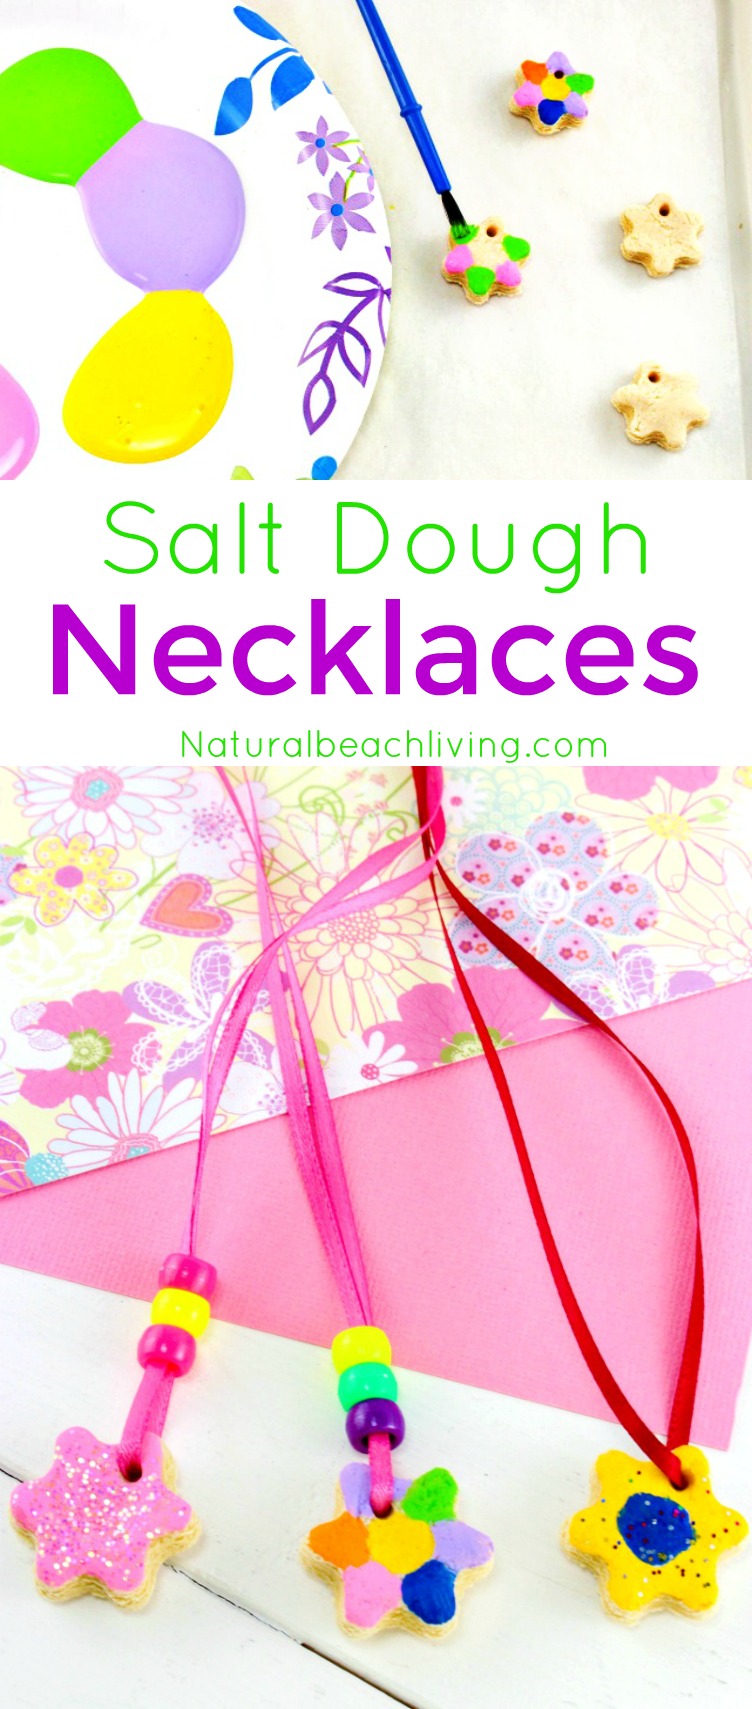 This is the Best Salt Dough Recipe Ever! Make Salt Dough Necklaces and Ornaments for Mother's Day. An Easy Handmade gift idea for kids, Use this for a Mother's Day Art Project or Process Art activity for preschoolers.